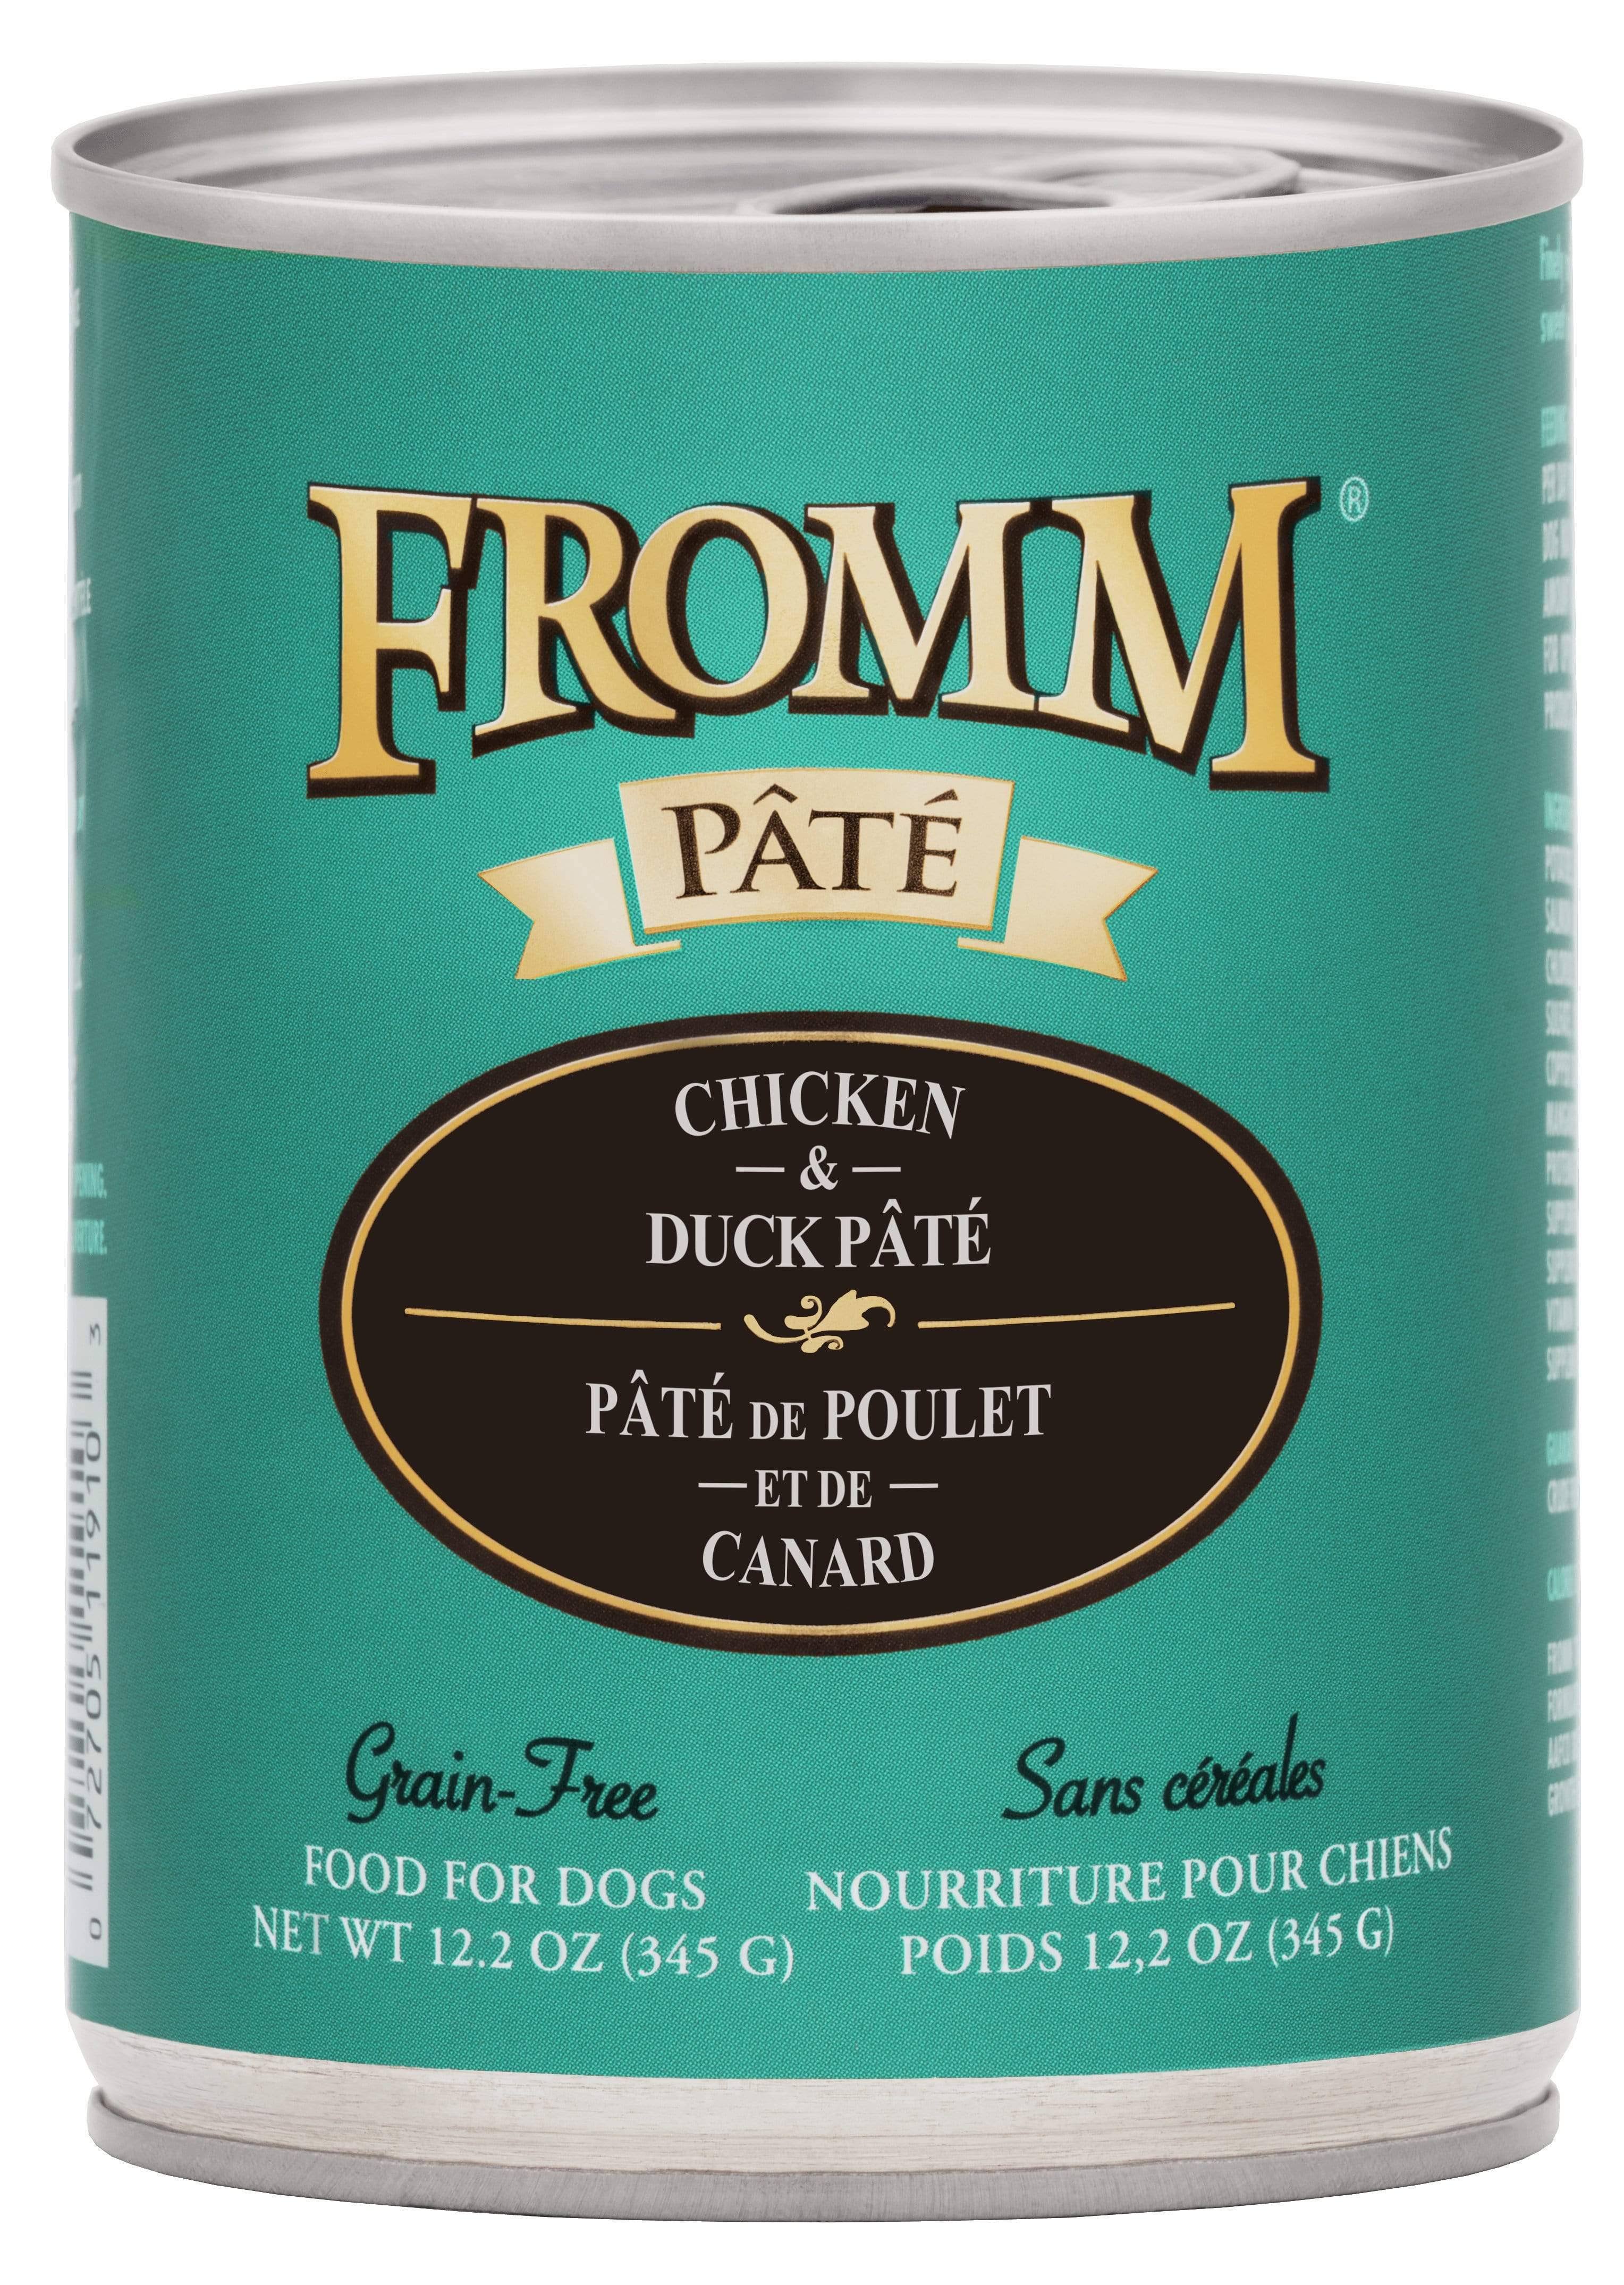 Fromm Chicken & Duck Pate Canned Dog Food 12.2oz